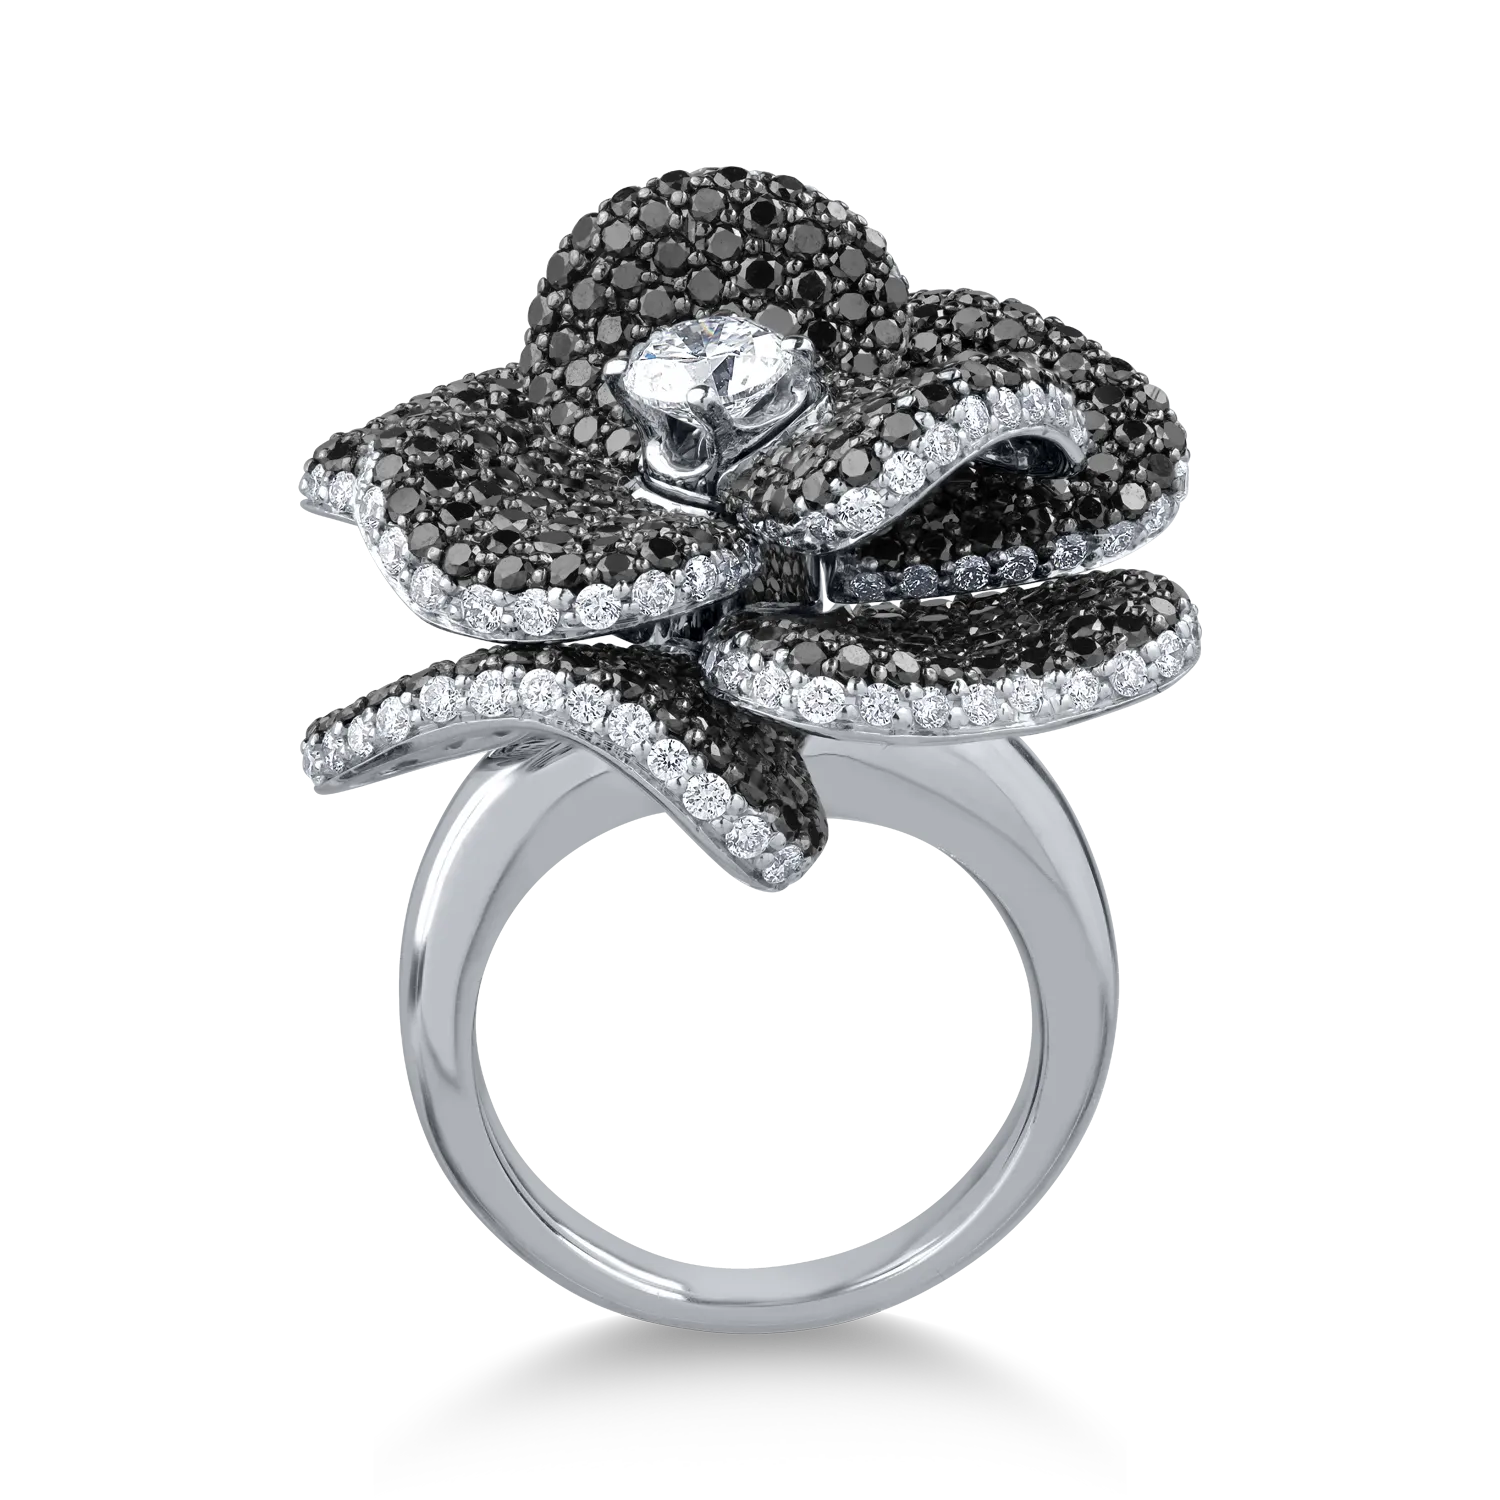 18K white gold ring with 4.83ct black diamonds and 2.04ct clear diamonds